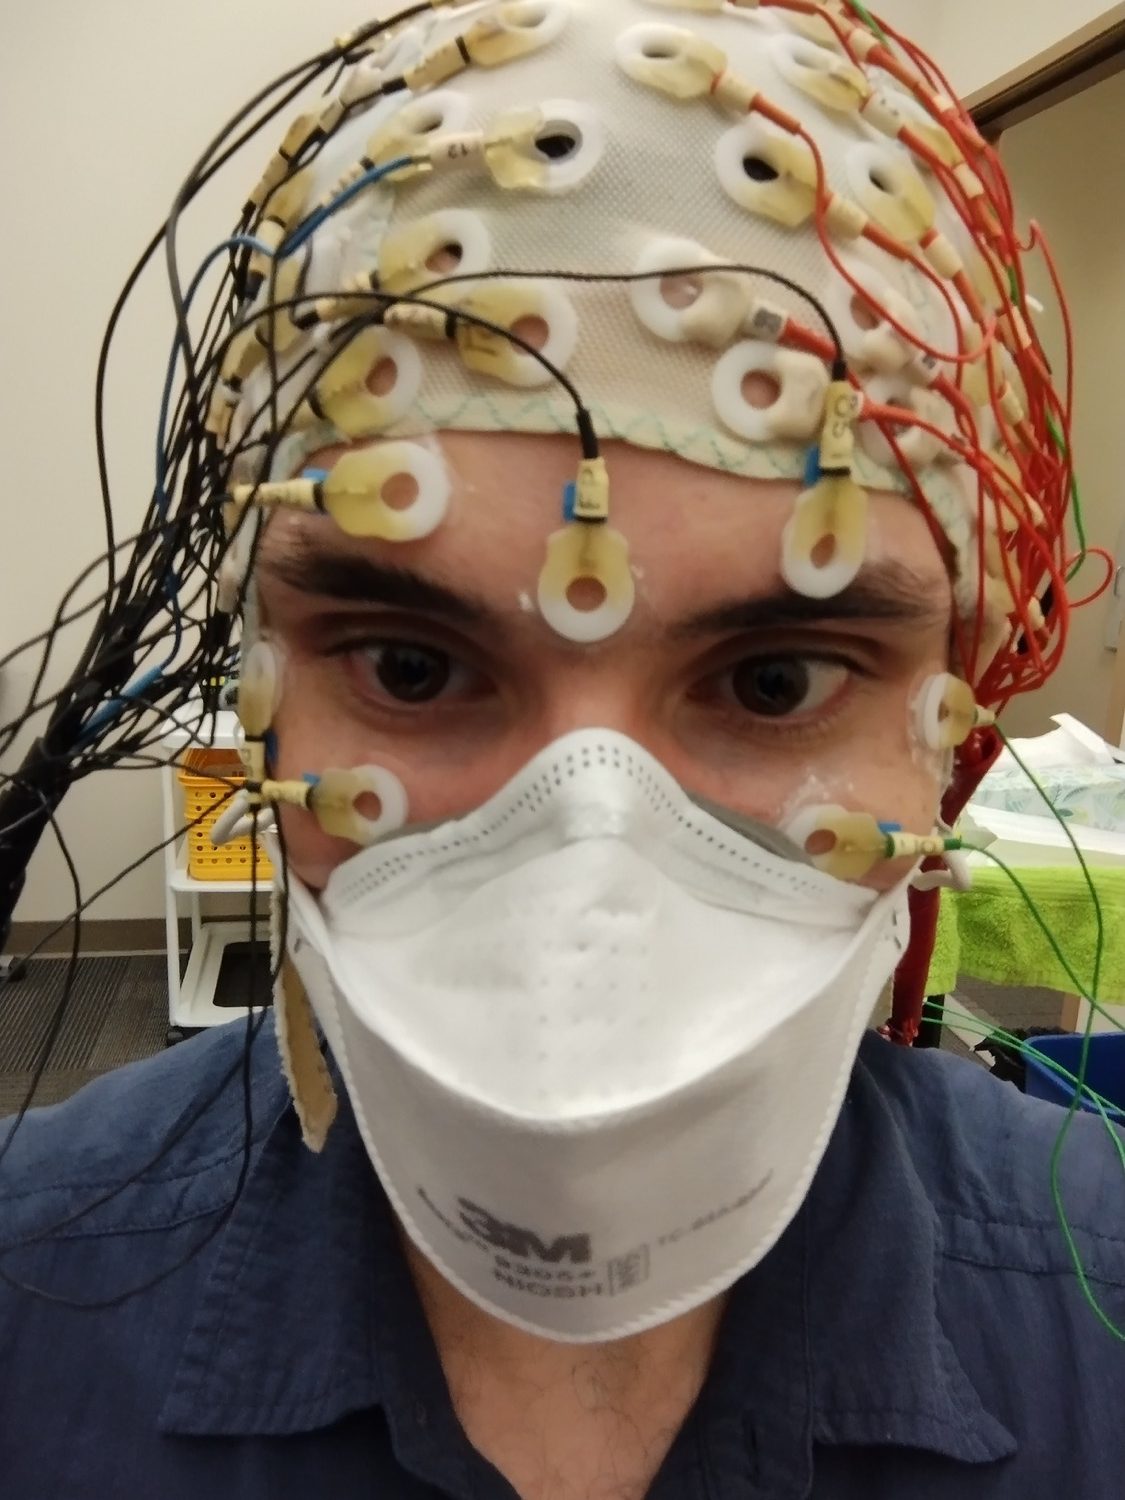 Headshot of Patrick, a white man wearing a dark blue shirt, with an EEG cap on his head. The cap has many electrodes looking like small white circular rings attached; numerous wires of various colors are connected to these electrodes.